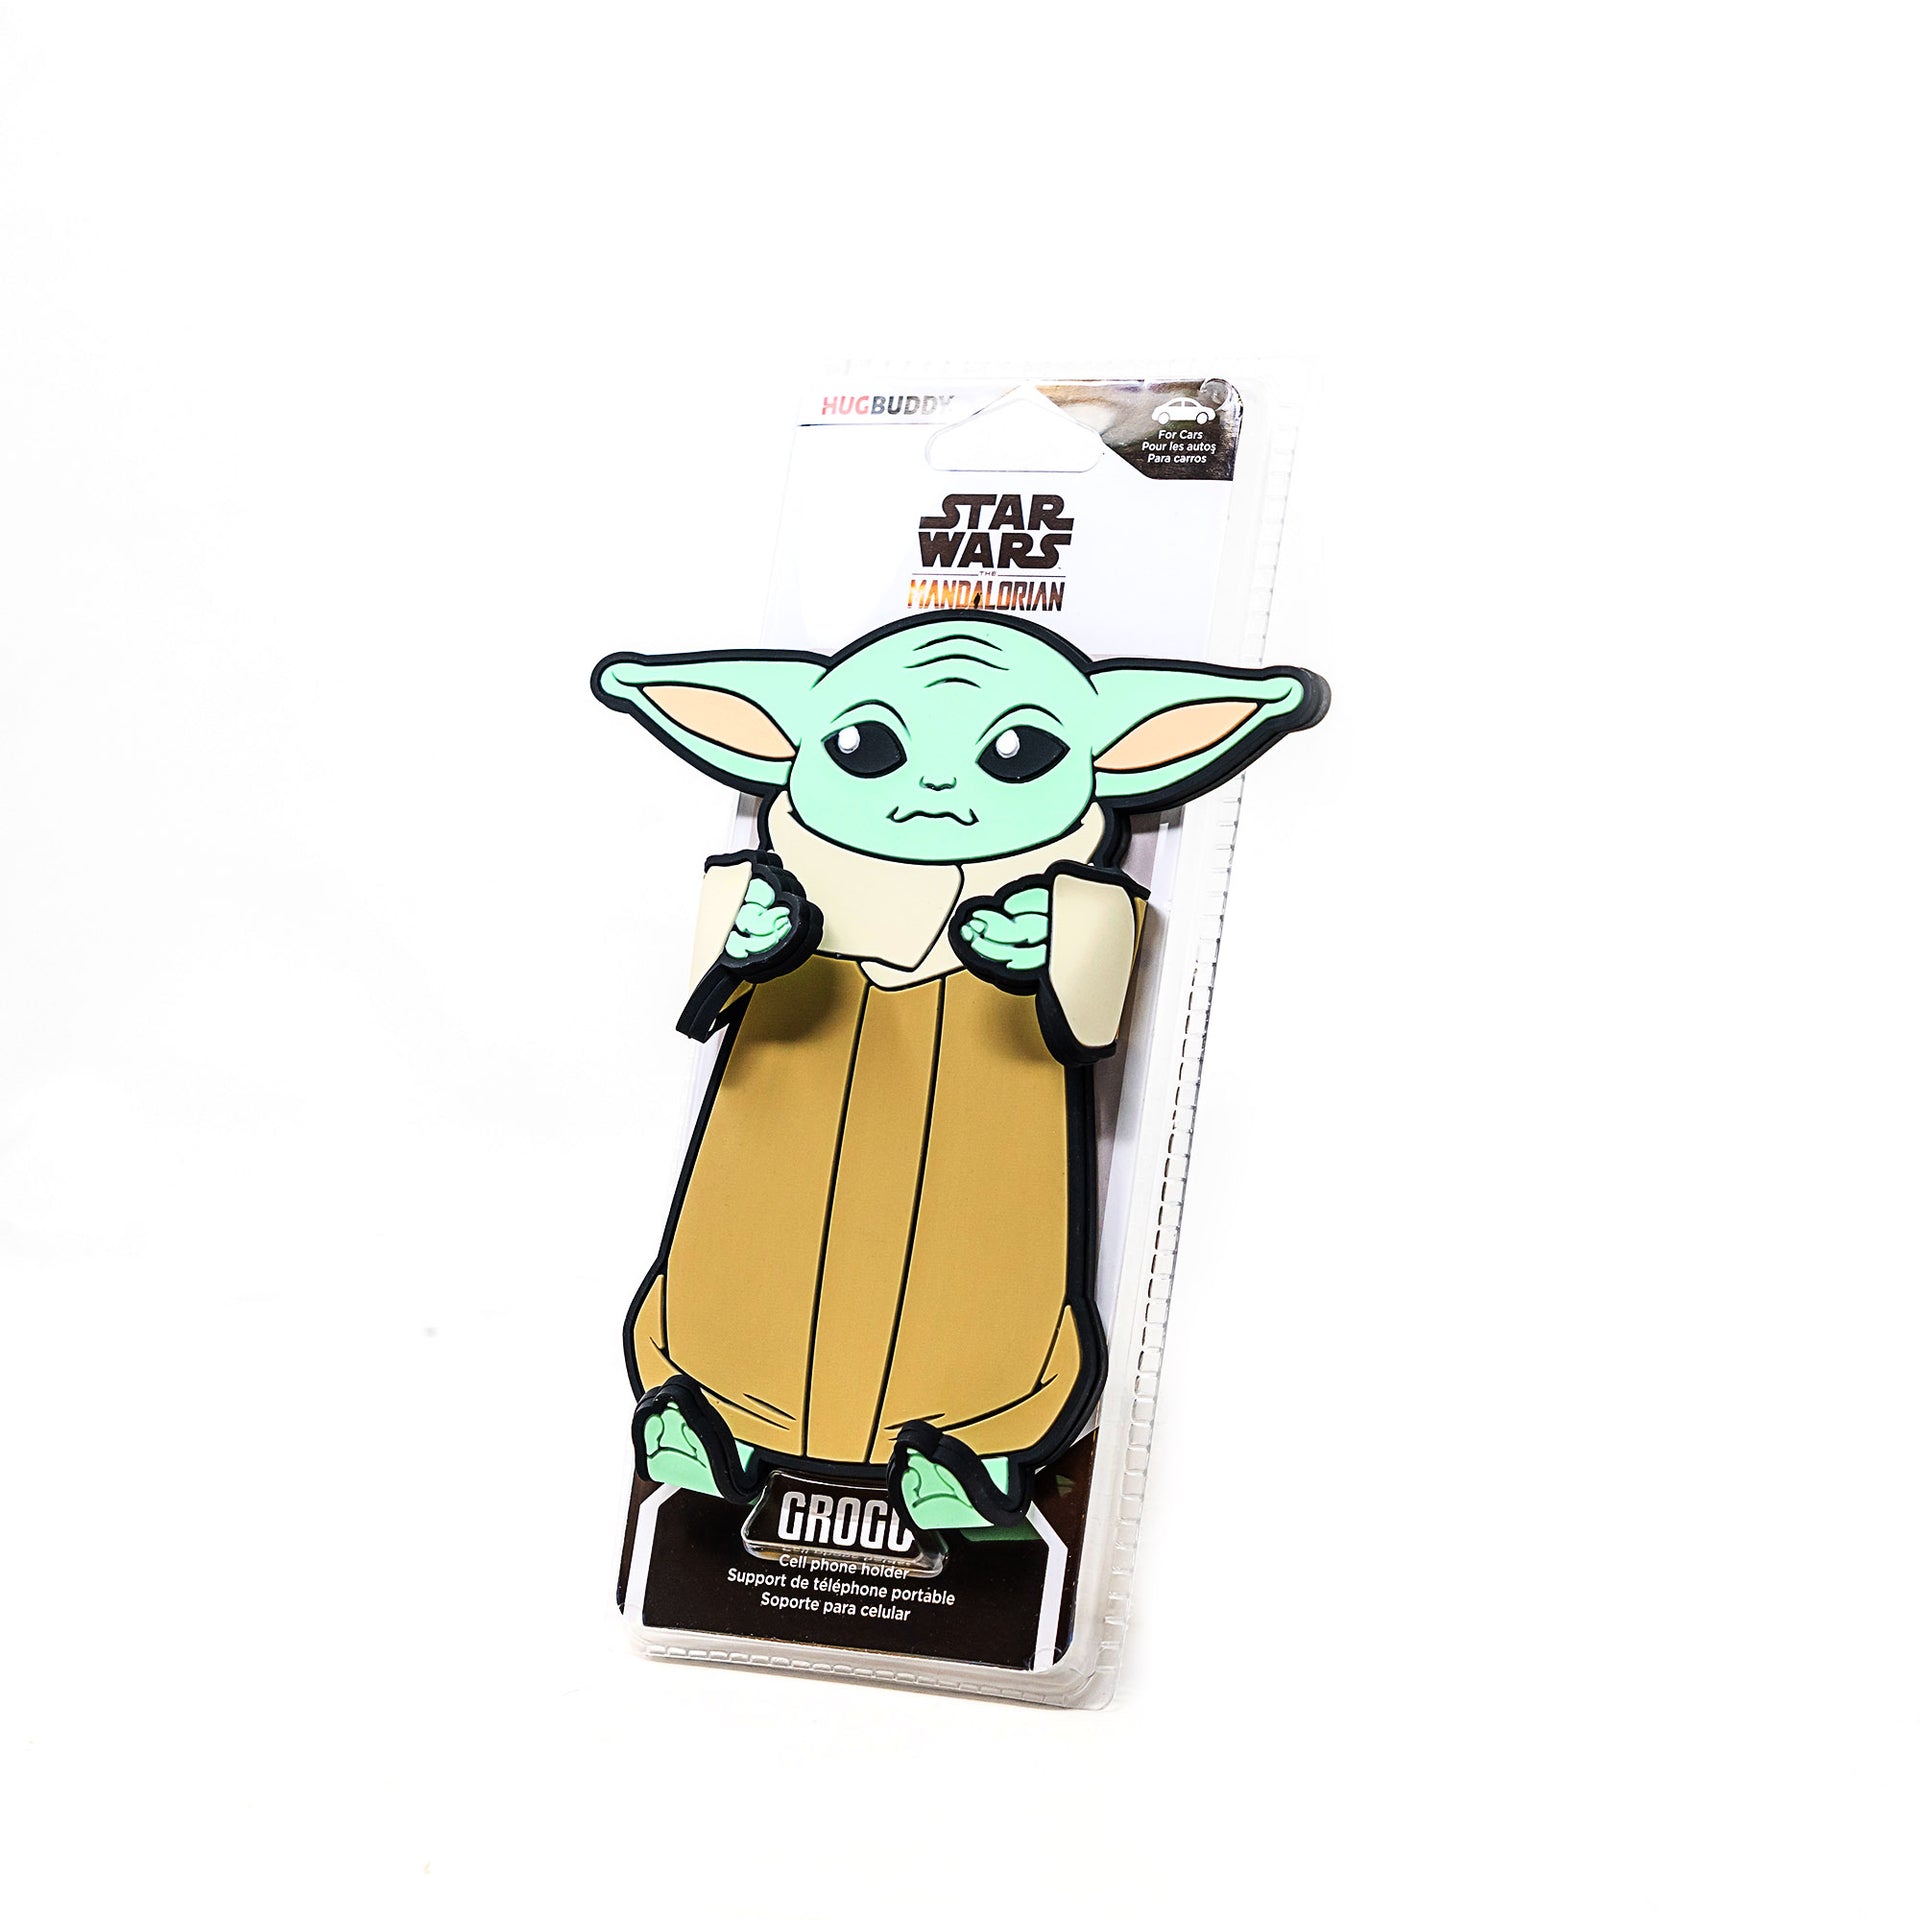 Image of Star Wars the Mandalorian Grogu Hug Buddy packaging front view with slight angle